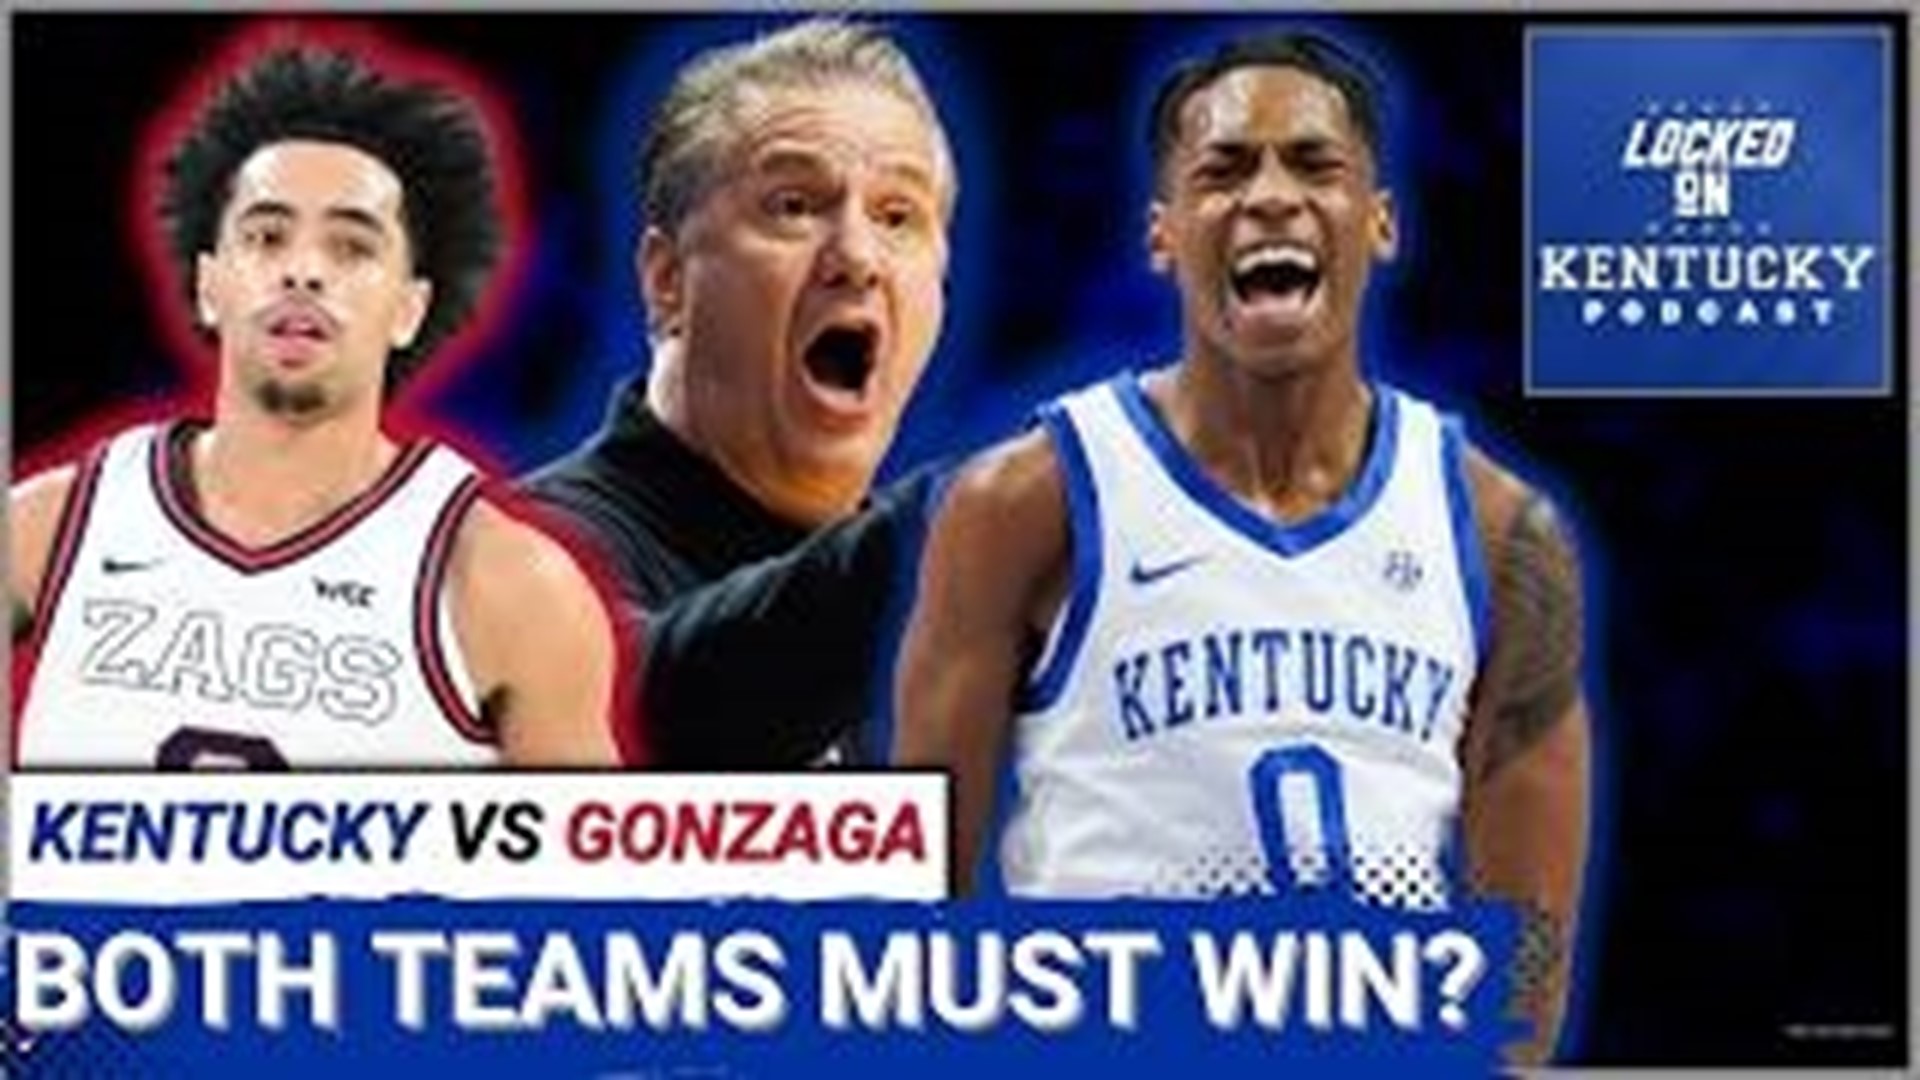 Kentucky basketball has a very interesting matchup this weekend... against the Gonzaga Bulldogs?